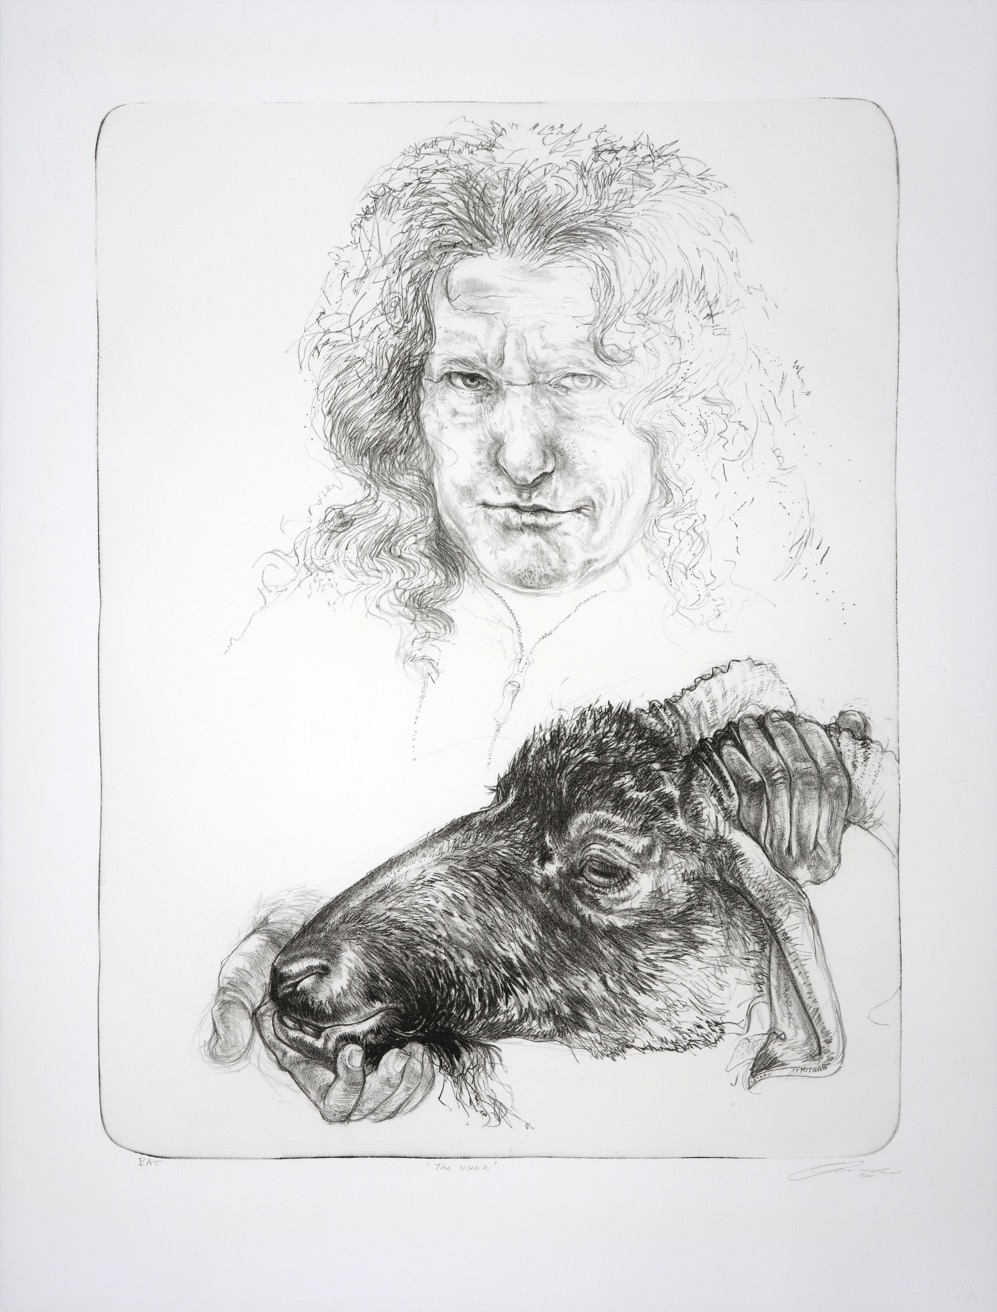 Diane Victor self-portrait of her head and shoulders with goat head in her hands